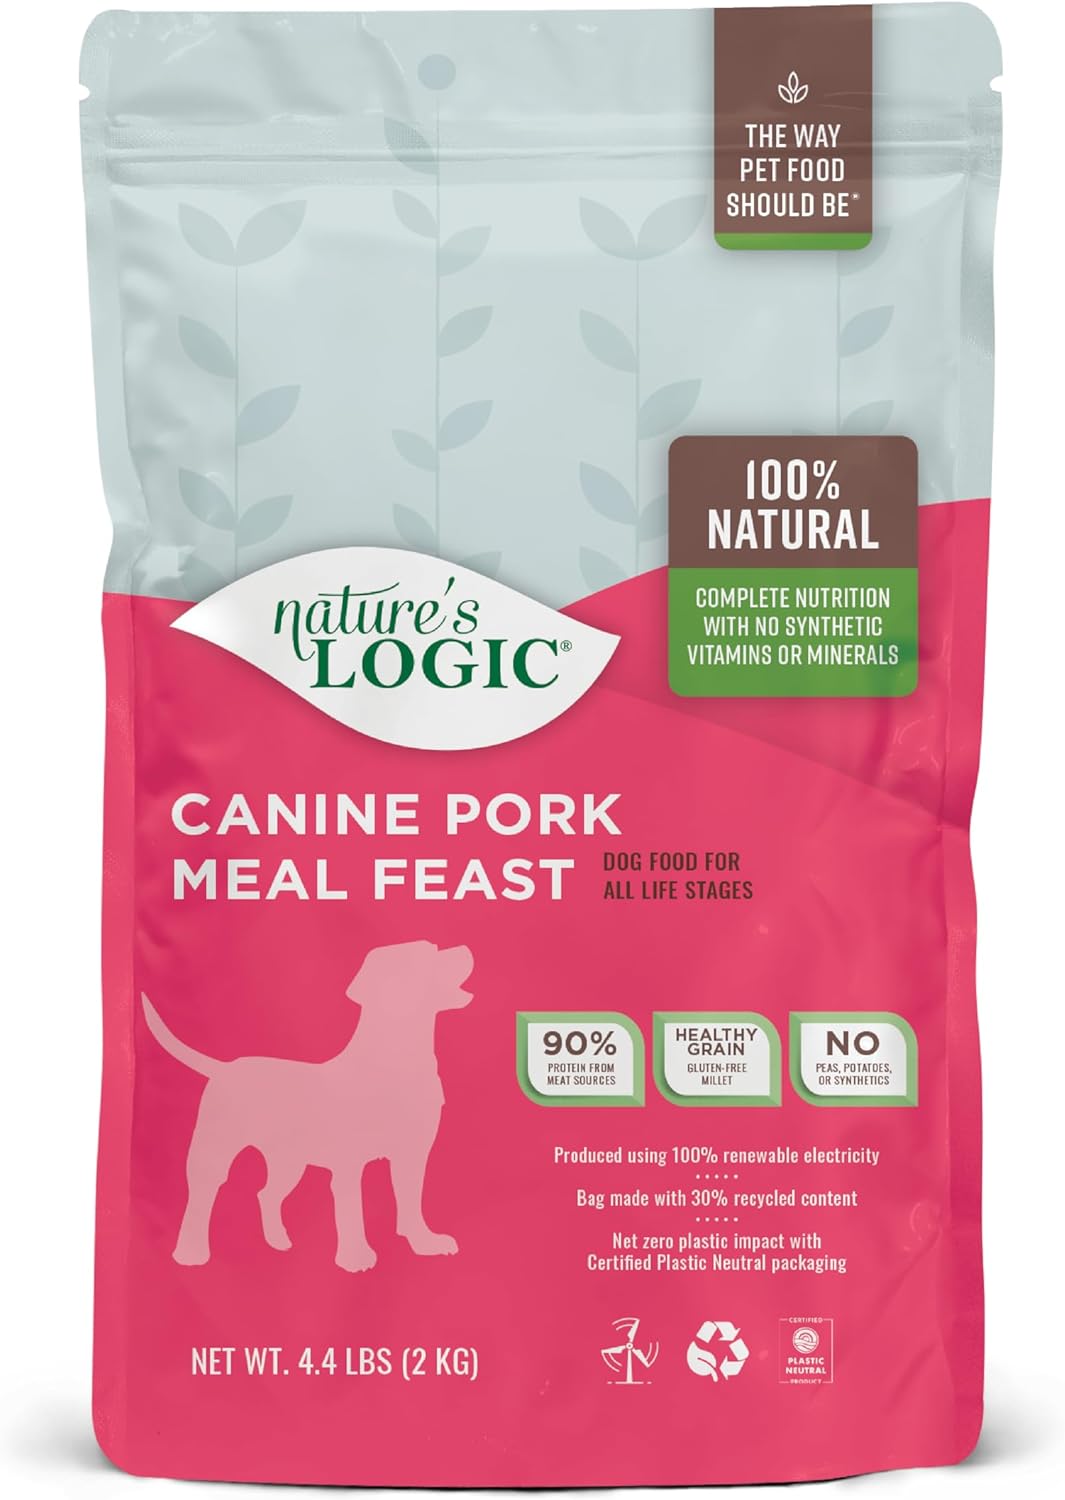 Nature’s Logic Canine Pork Meal Feast Dry Dog Food – Gallery Image 1